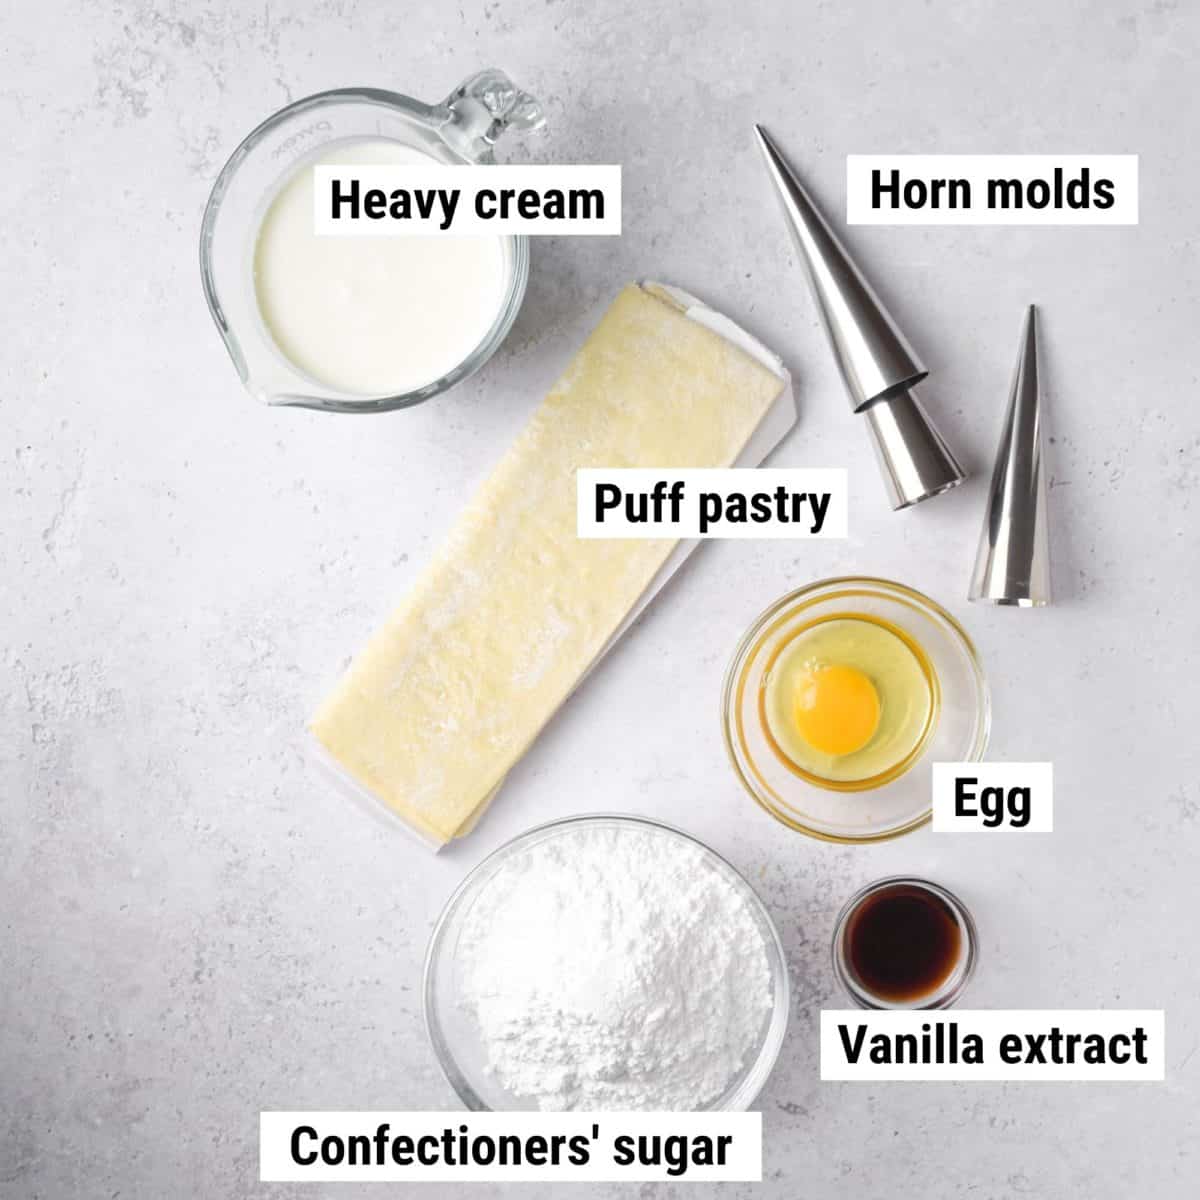 The ingredients used to make cream horns laid out on a table.